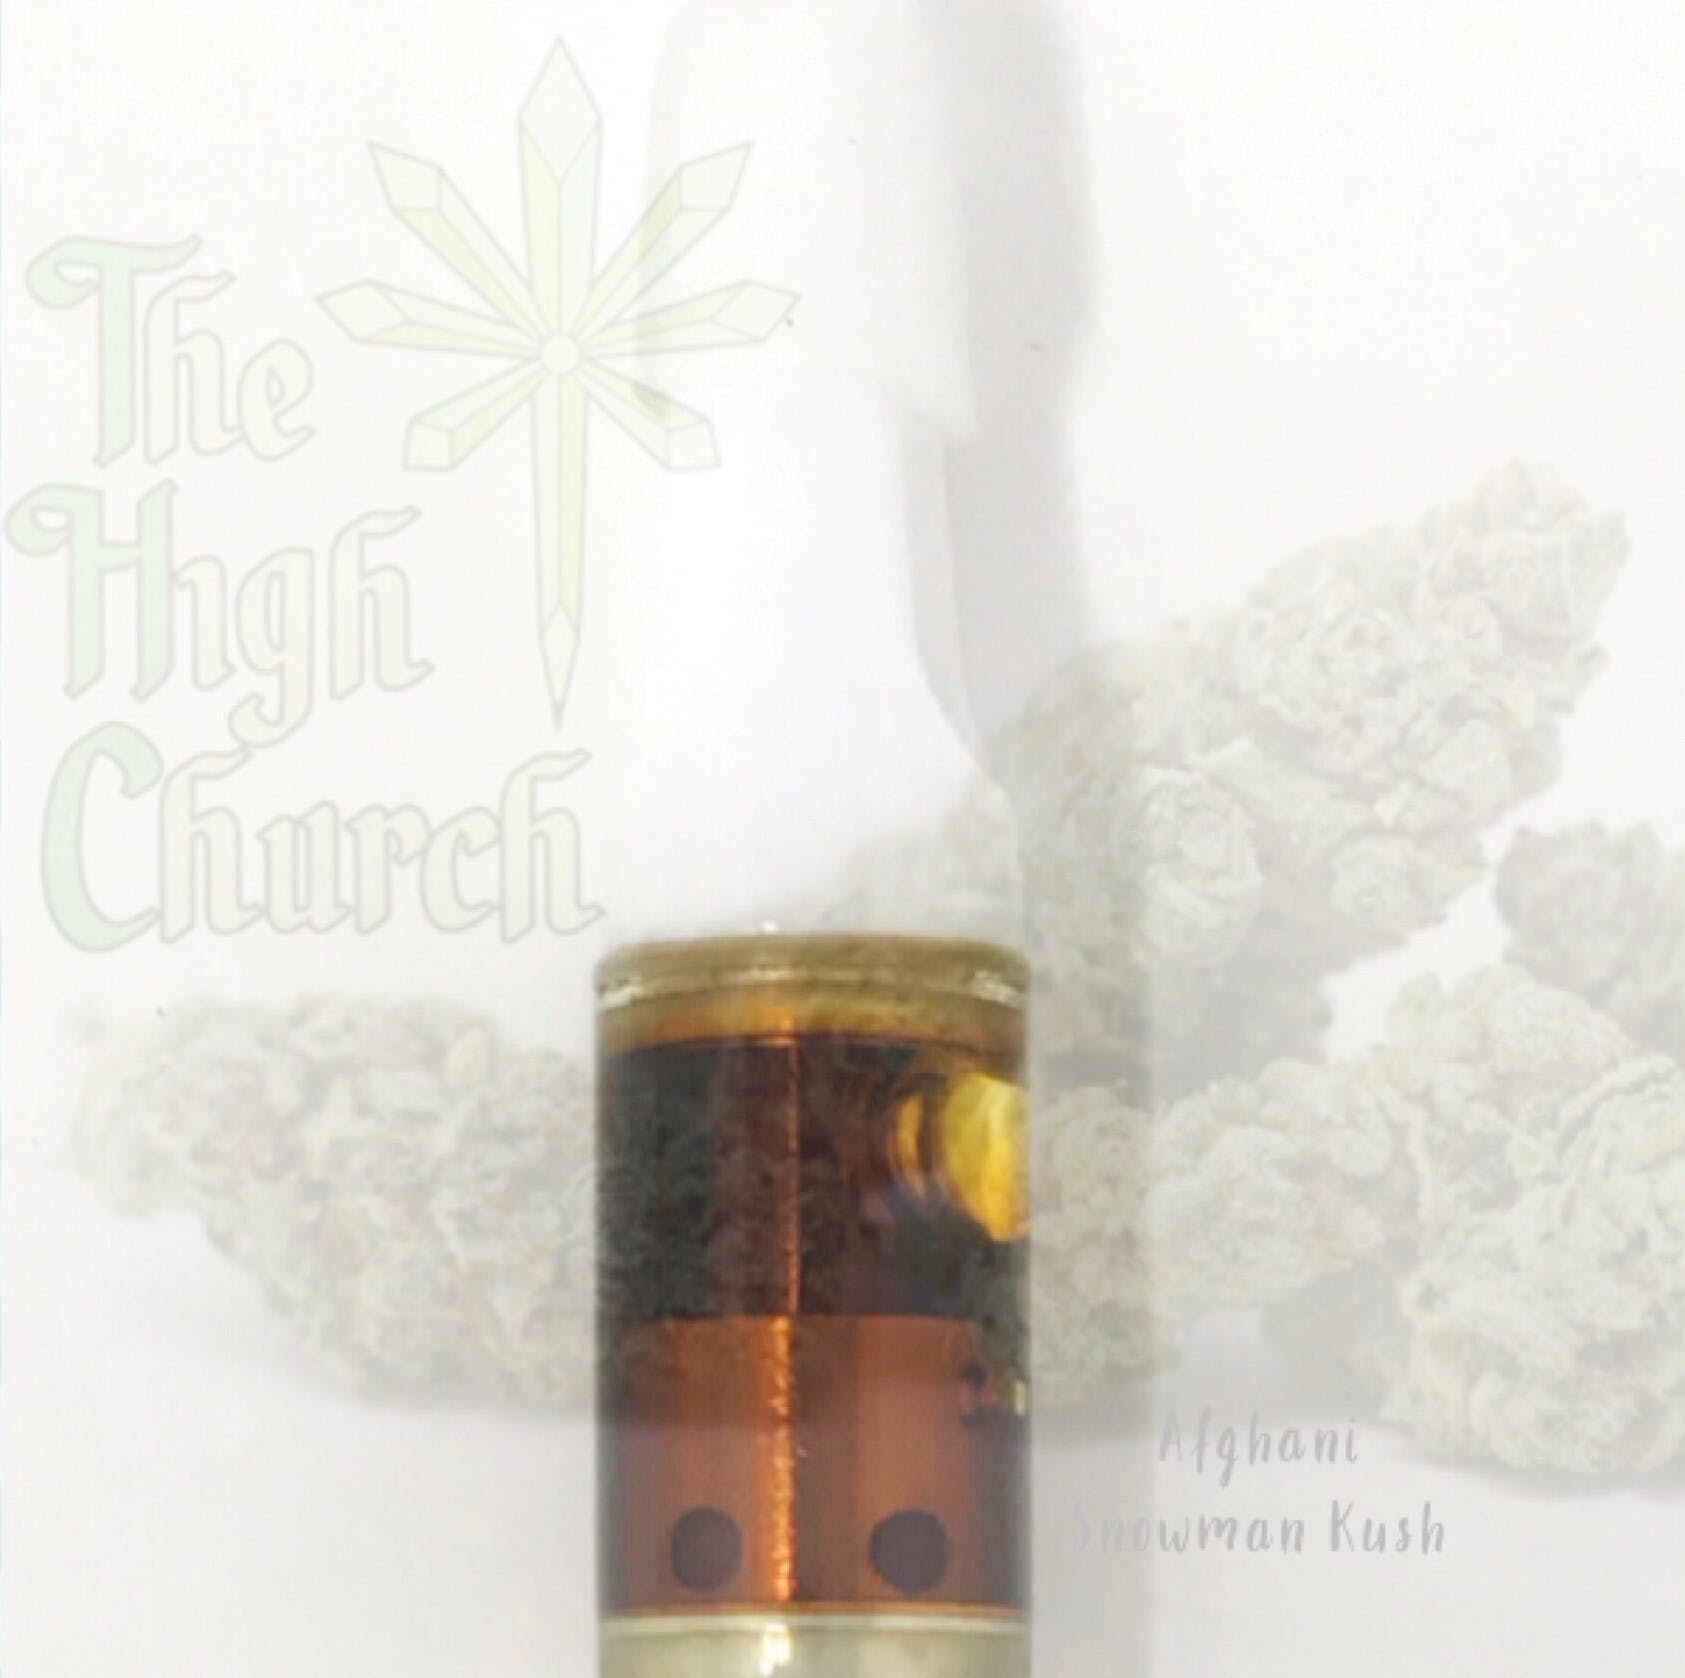 concentrate-the-high-church-co2-strain-specific-cartridge-afghani-snowman-70-25